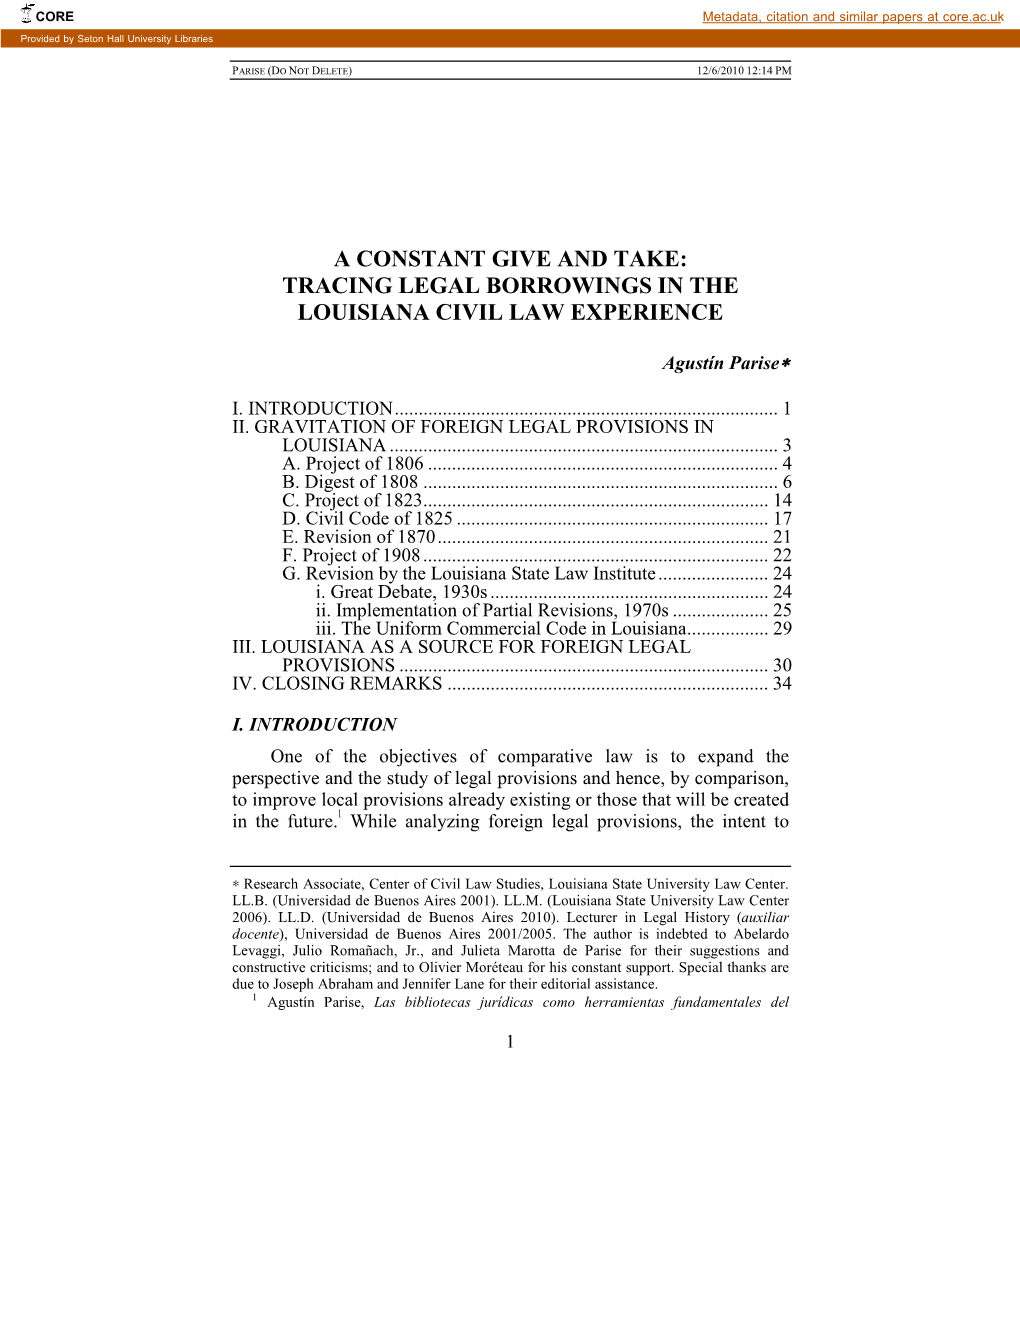 Tracing Legal Borrowings in the Louisiana Civil Law Experience